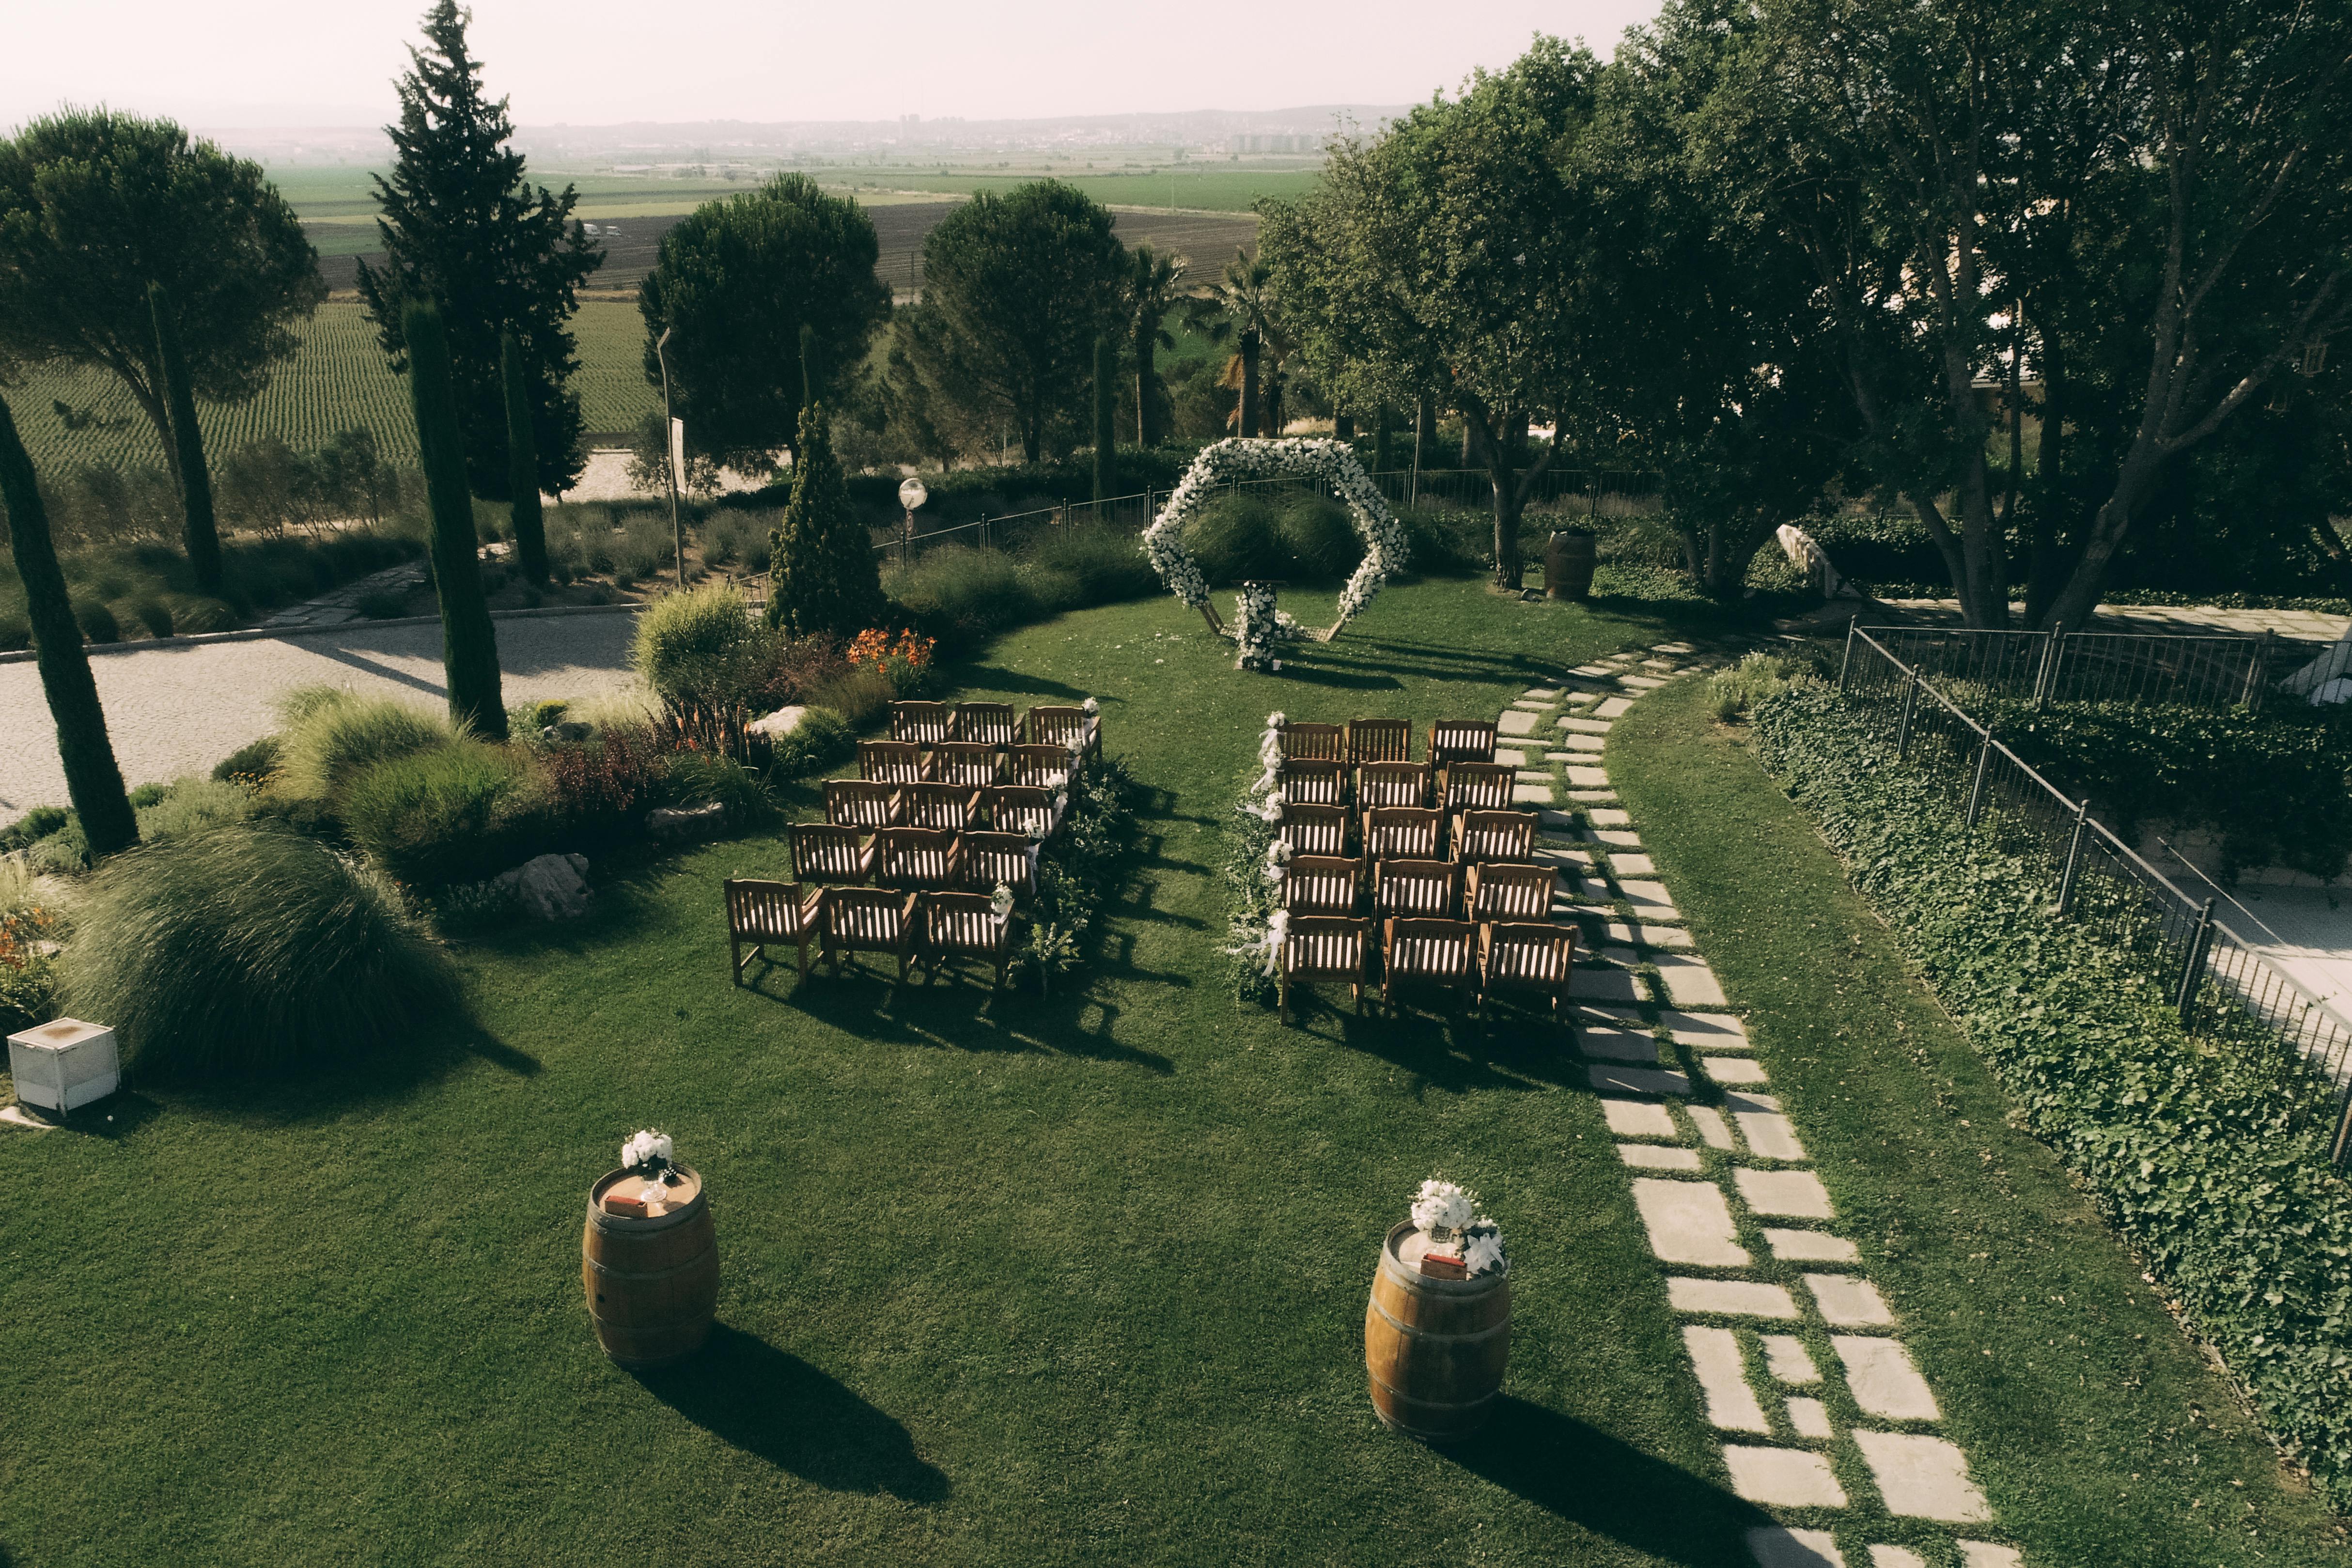 A garden prepared for a wedding ceremony | Source: Pexels